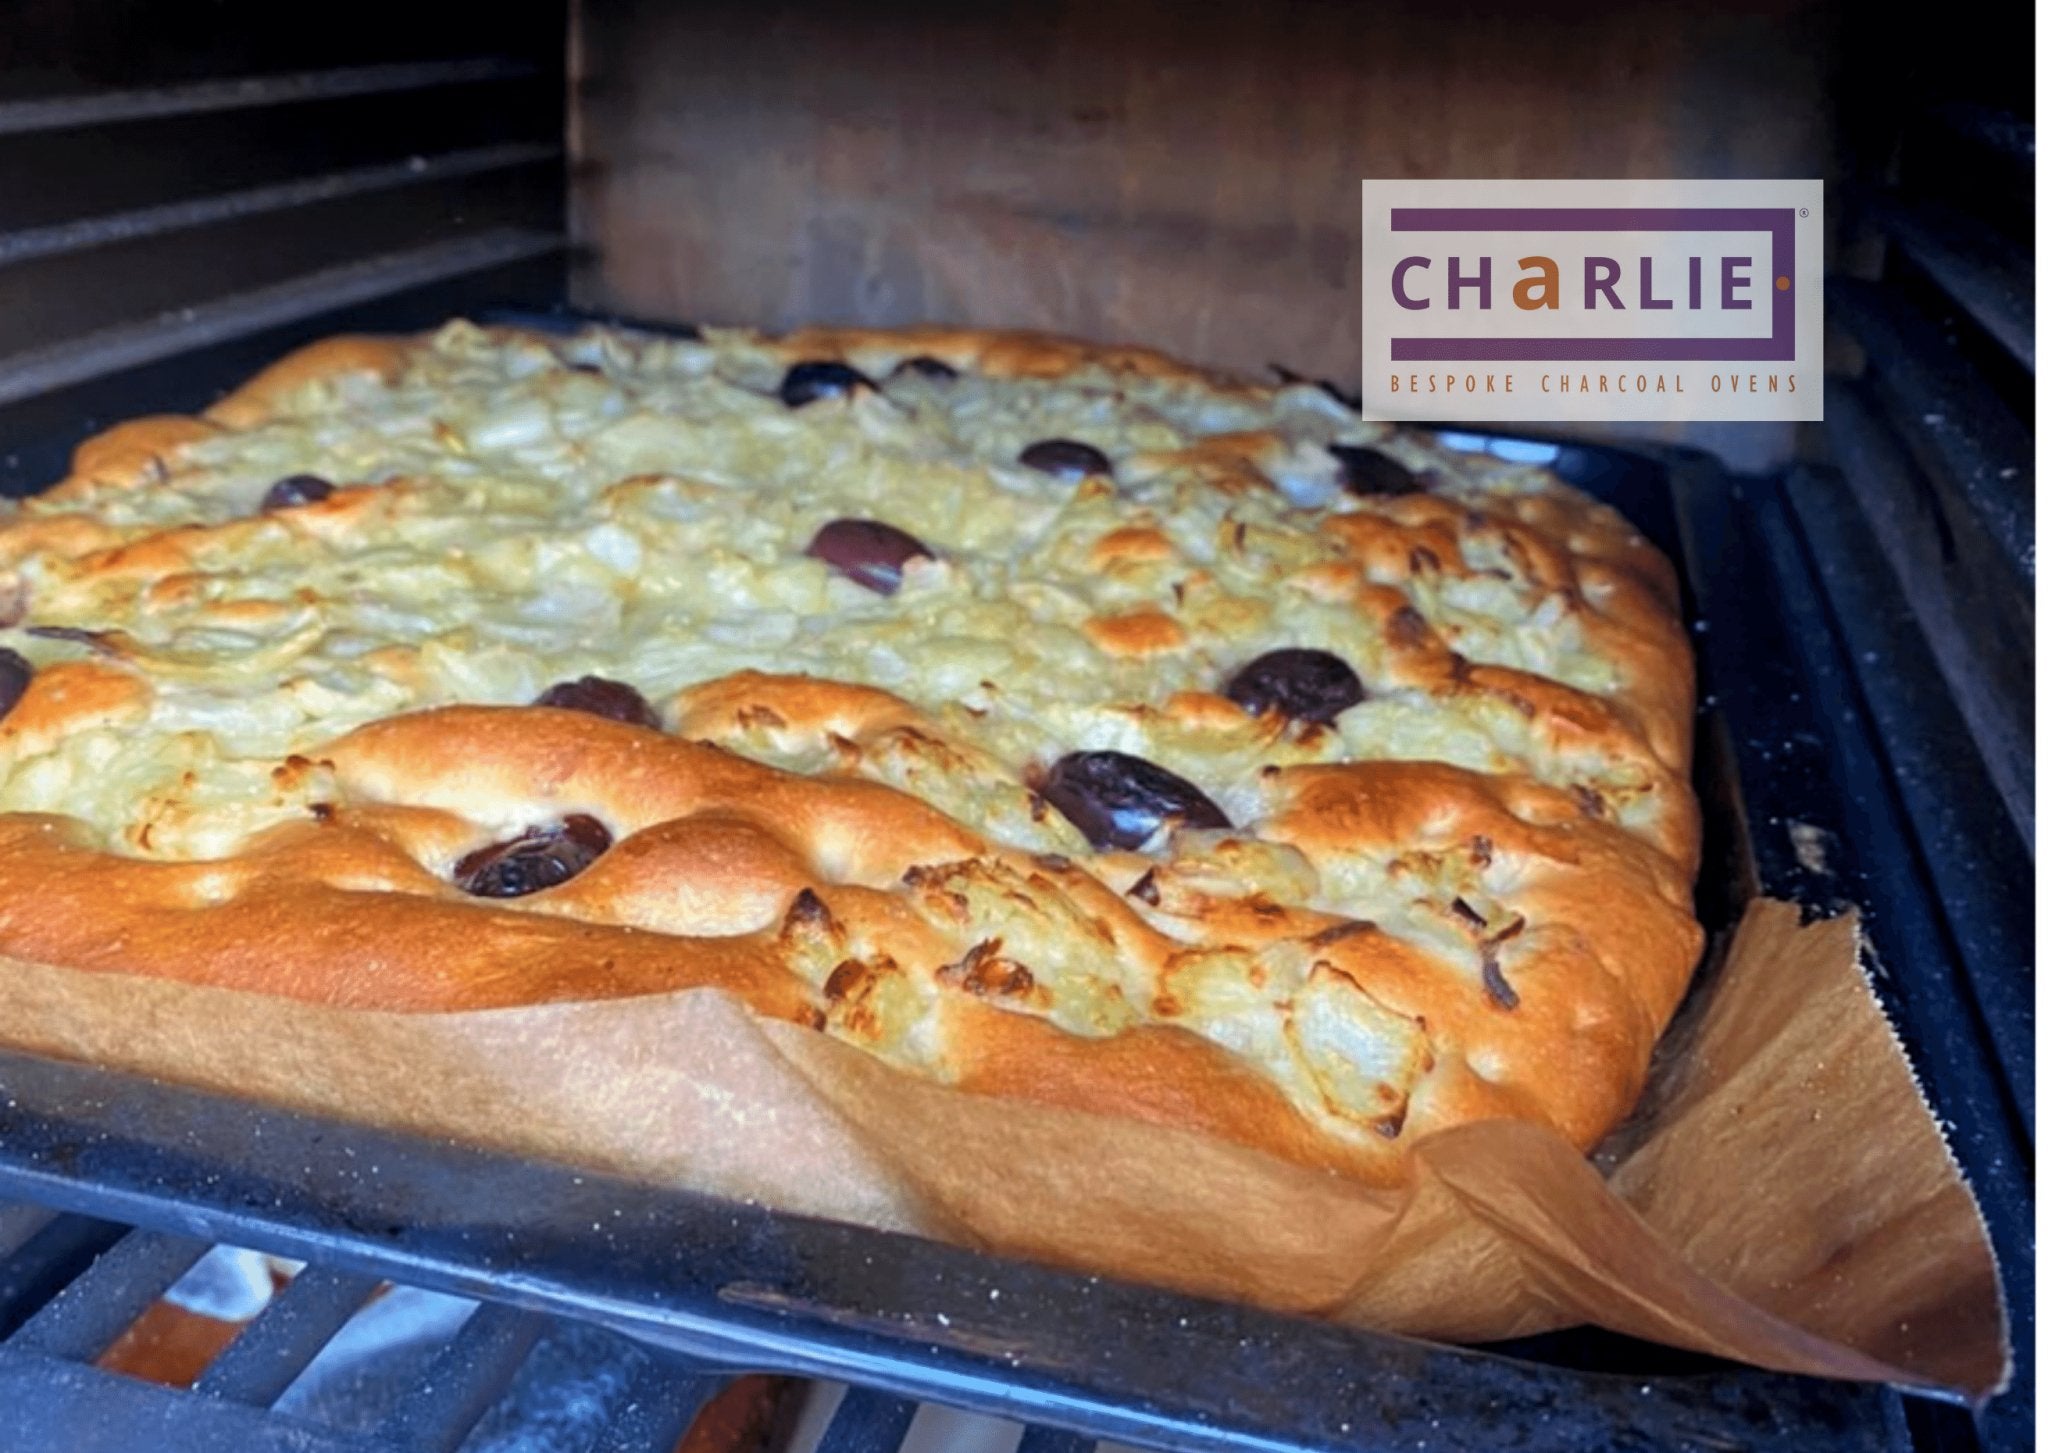 Italian Focaccia Baked Outdoors in the Charlie Oven - Charlie Oven